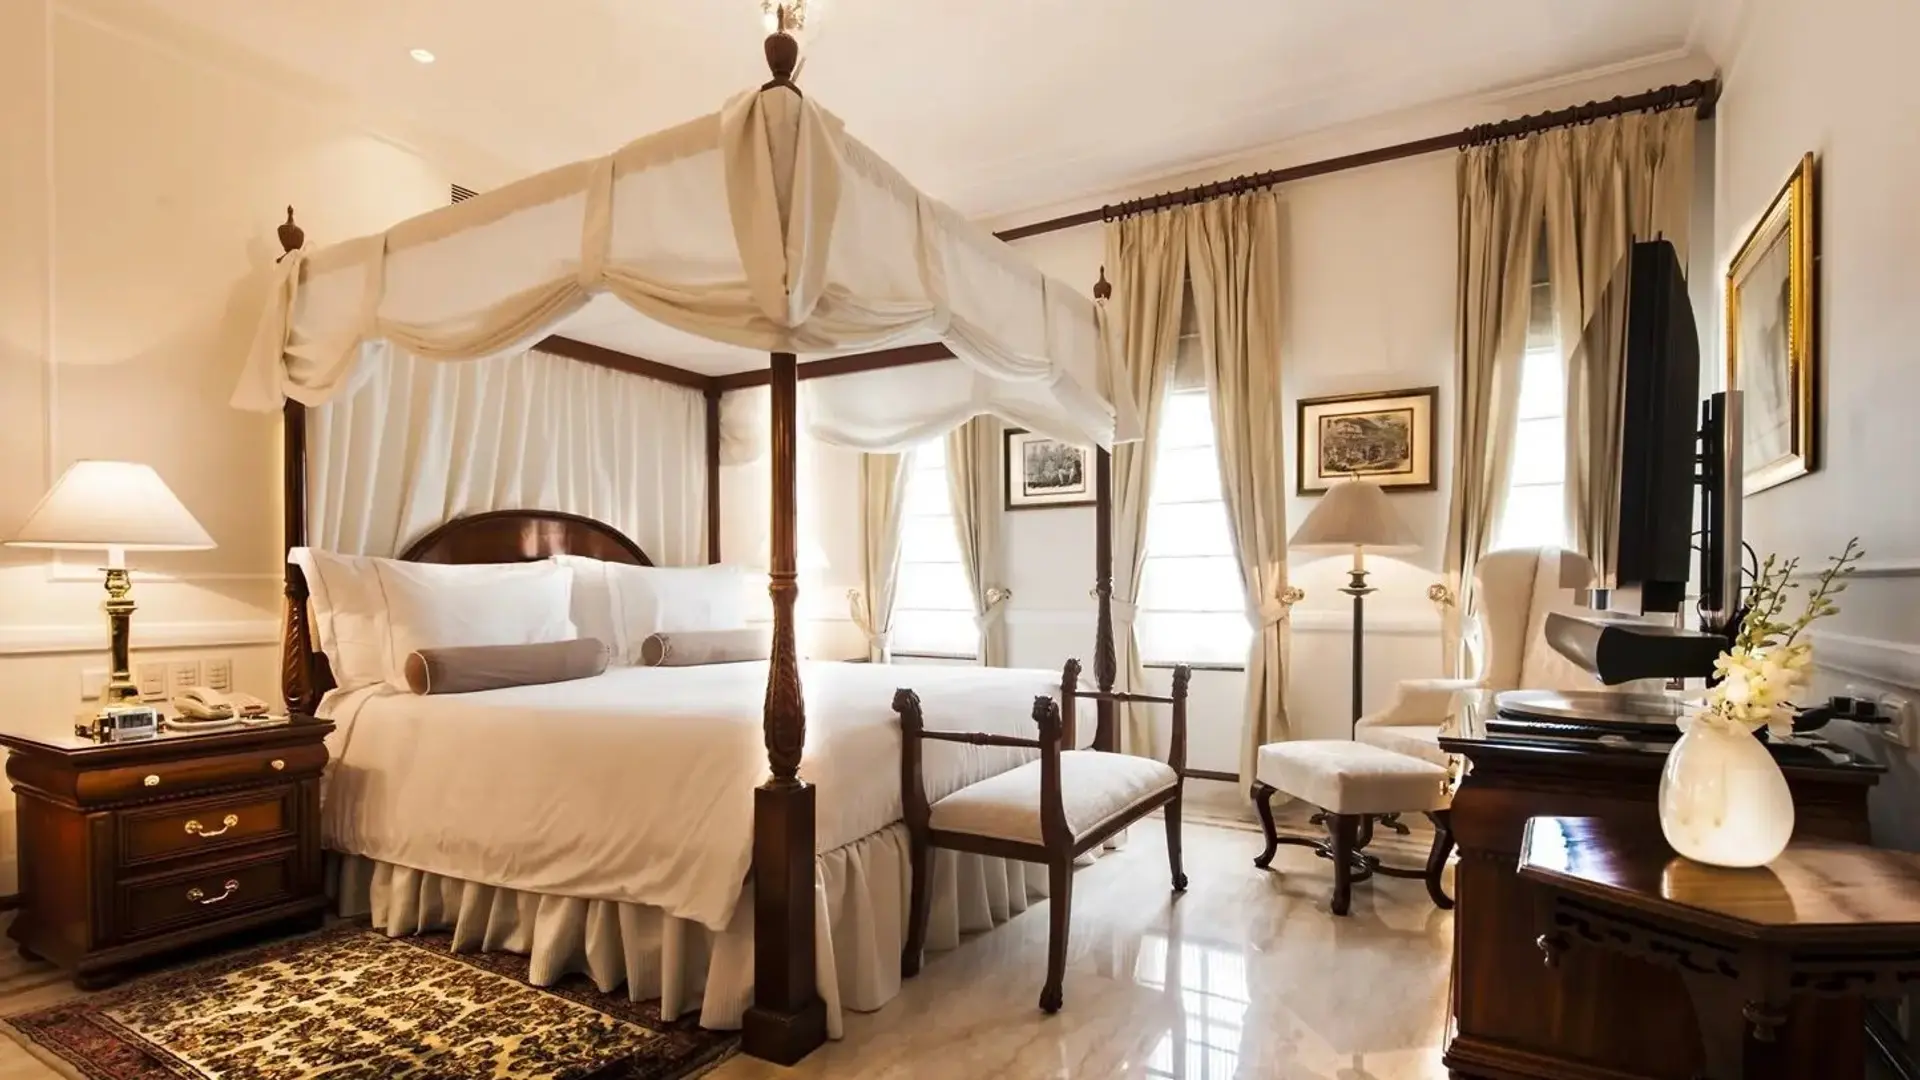 Hotels Toplists - The Best Luxury Hotels in Delhi and Agra